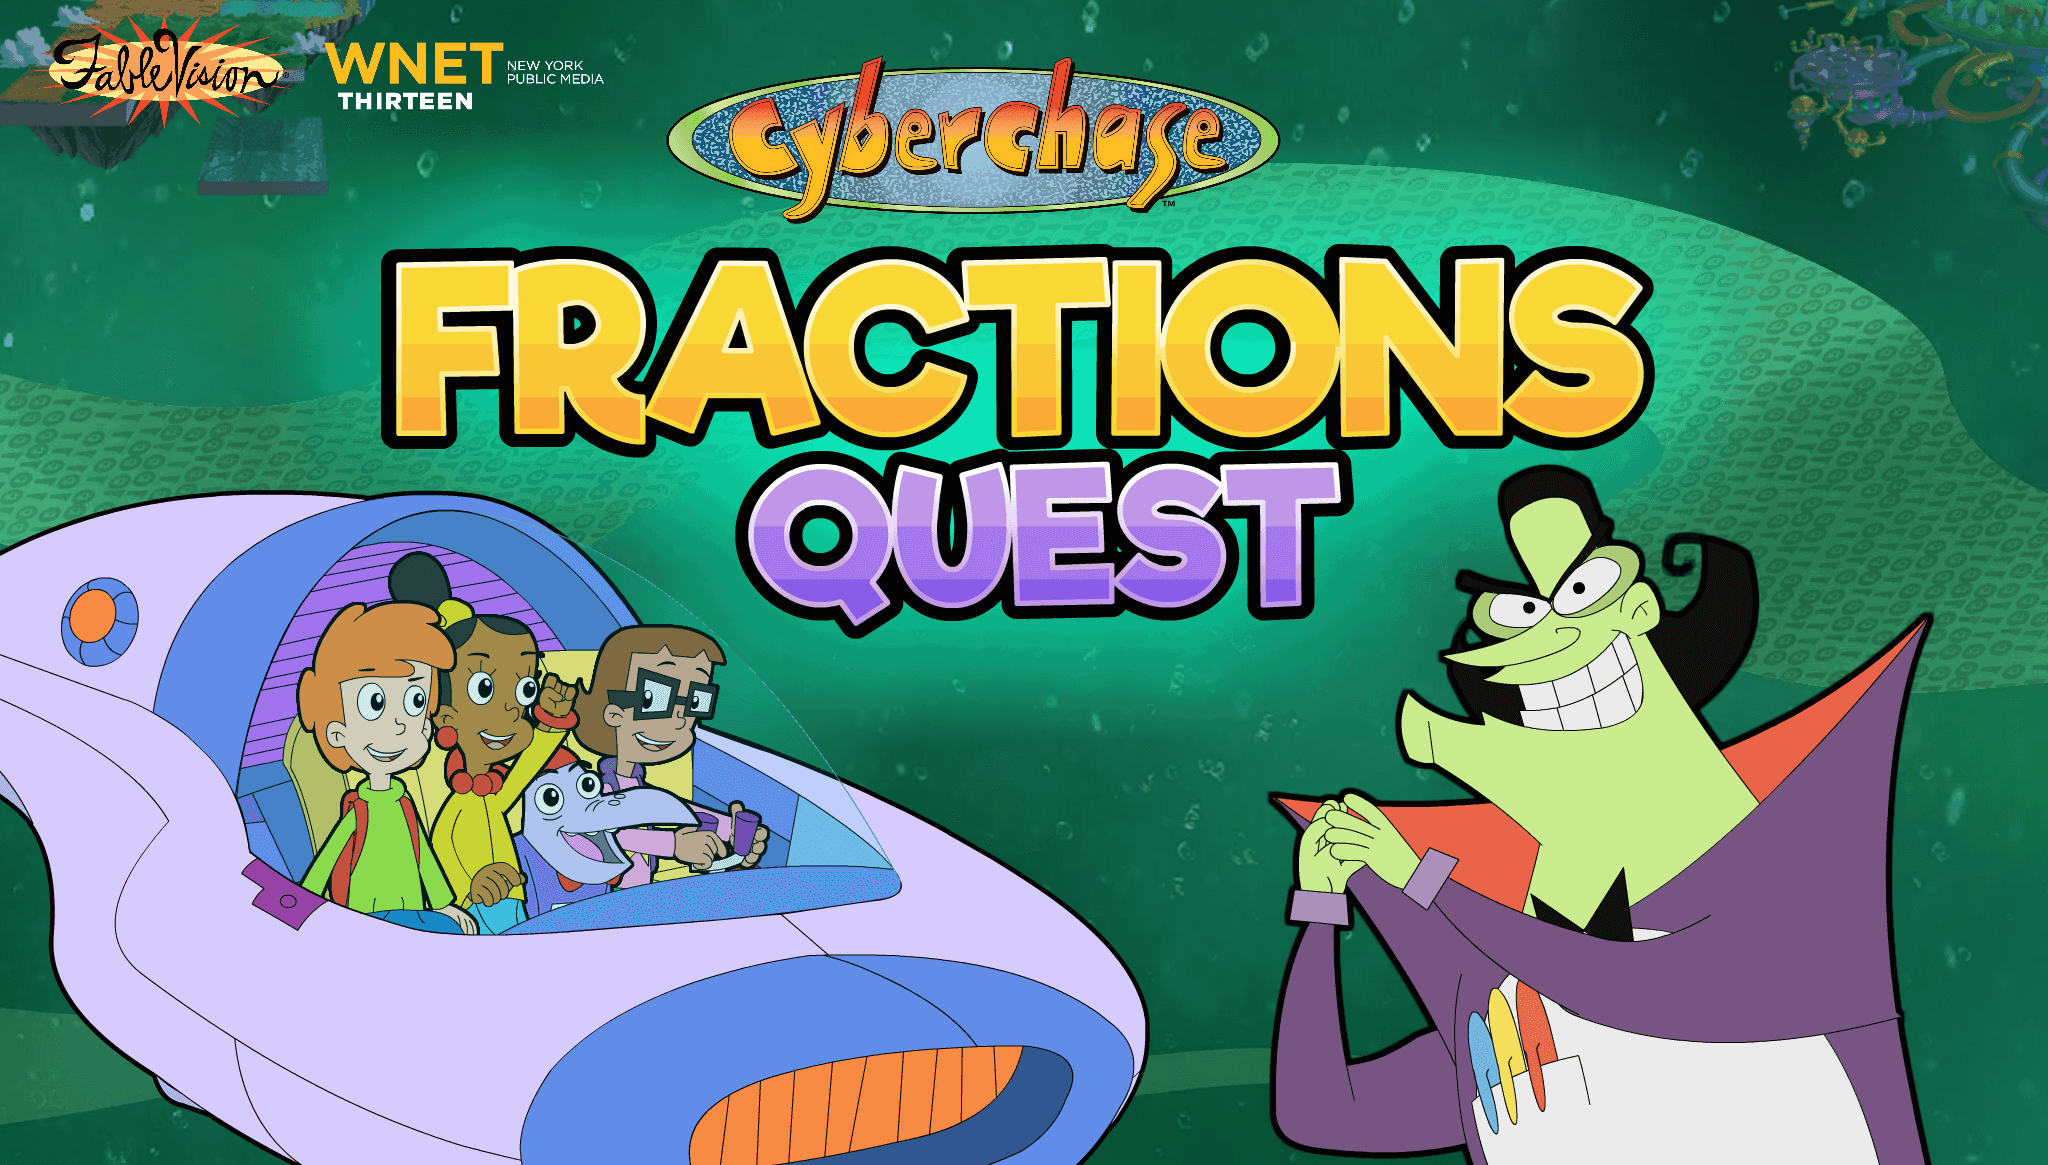 cyberchase-fractions-quest